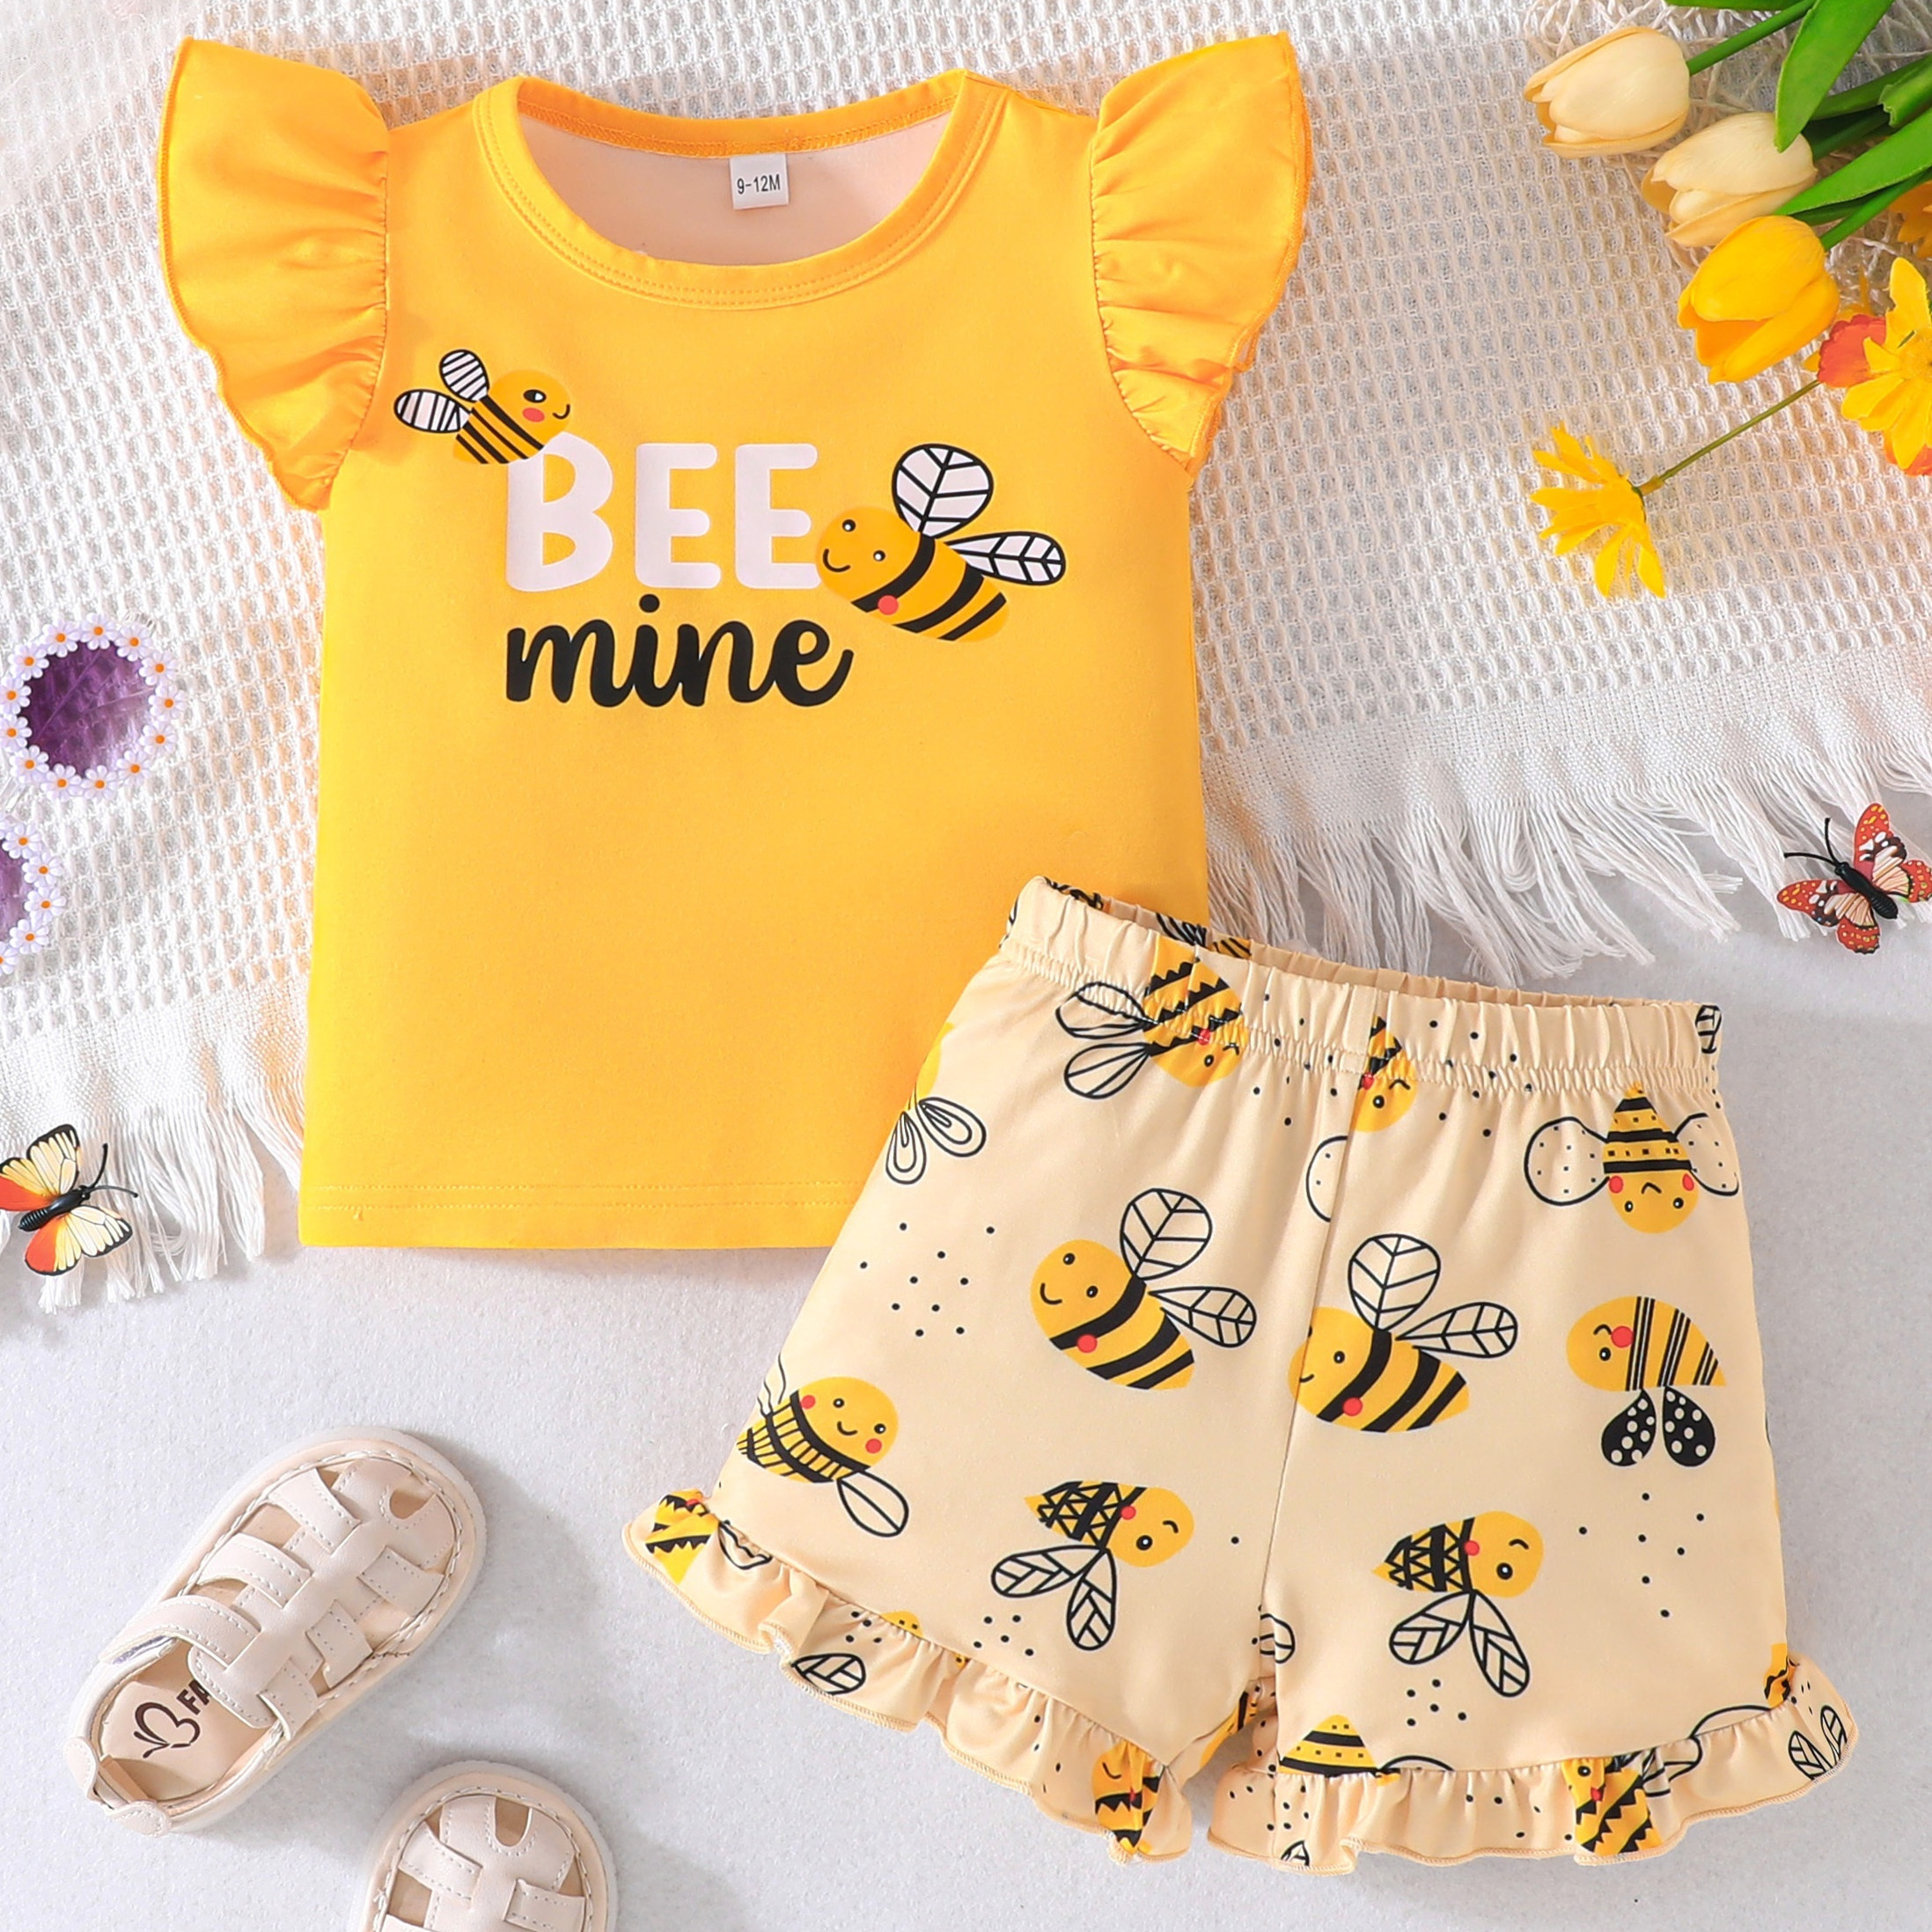 

Baby's Lovely "bee Mine" Print 2pcs Outfit, Cap Sleeve Top & Ruffle Trim Shorts Set, Toddler & Infant Girl's Clothes For Summer